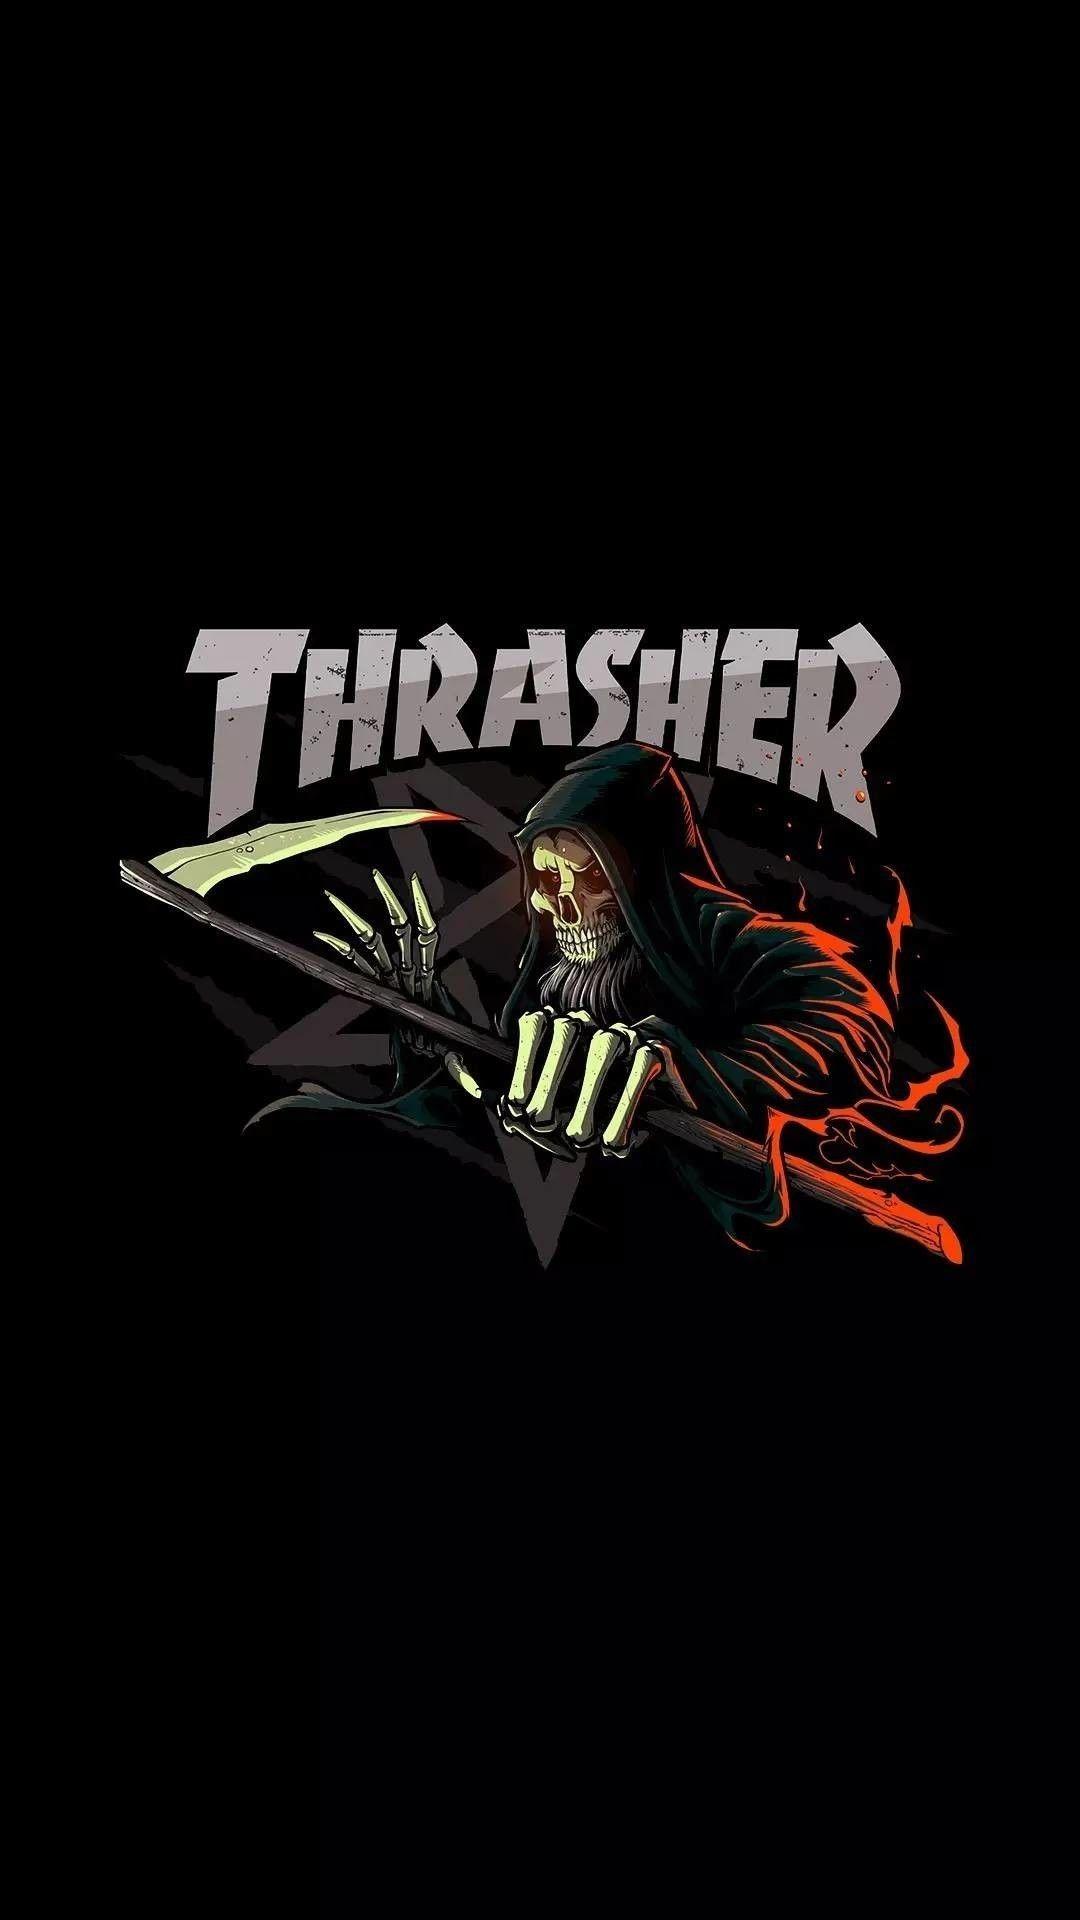 Download Thrasher wallpaper by Caleb134  ca  Free on ZEDGE now Browse  millions of popular spi  Hypebeast wallpaper Hypebeast iphone wallpaper  Hype wallpaper